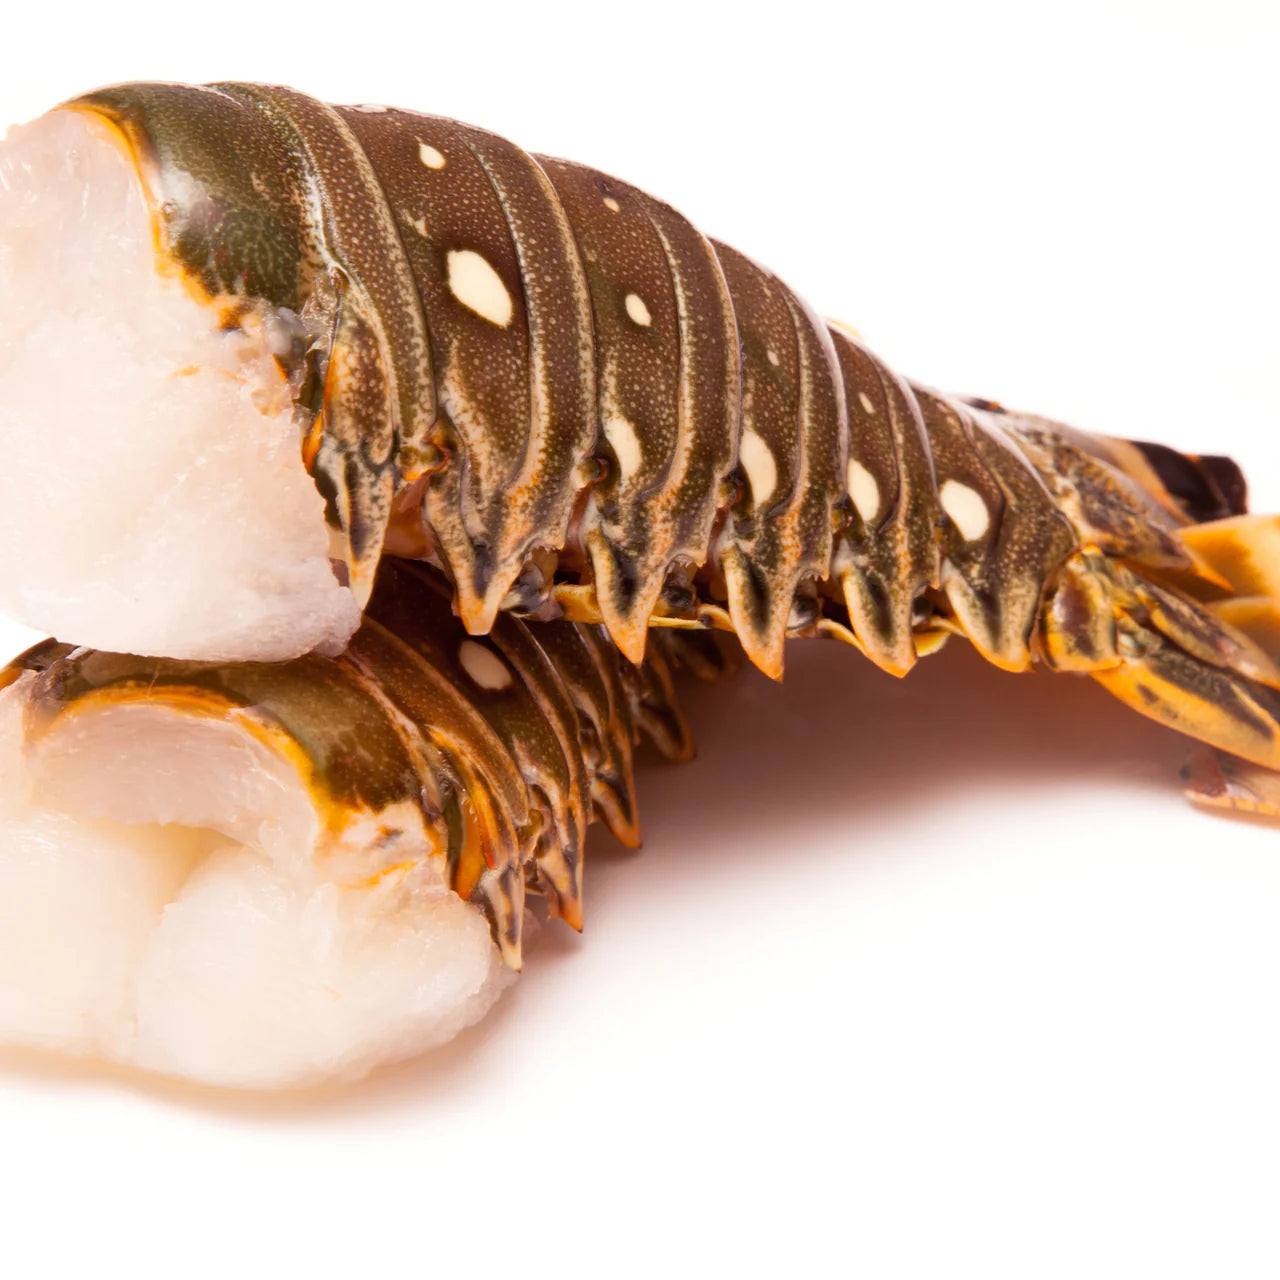 Spiny Lobster tails